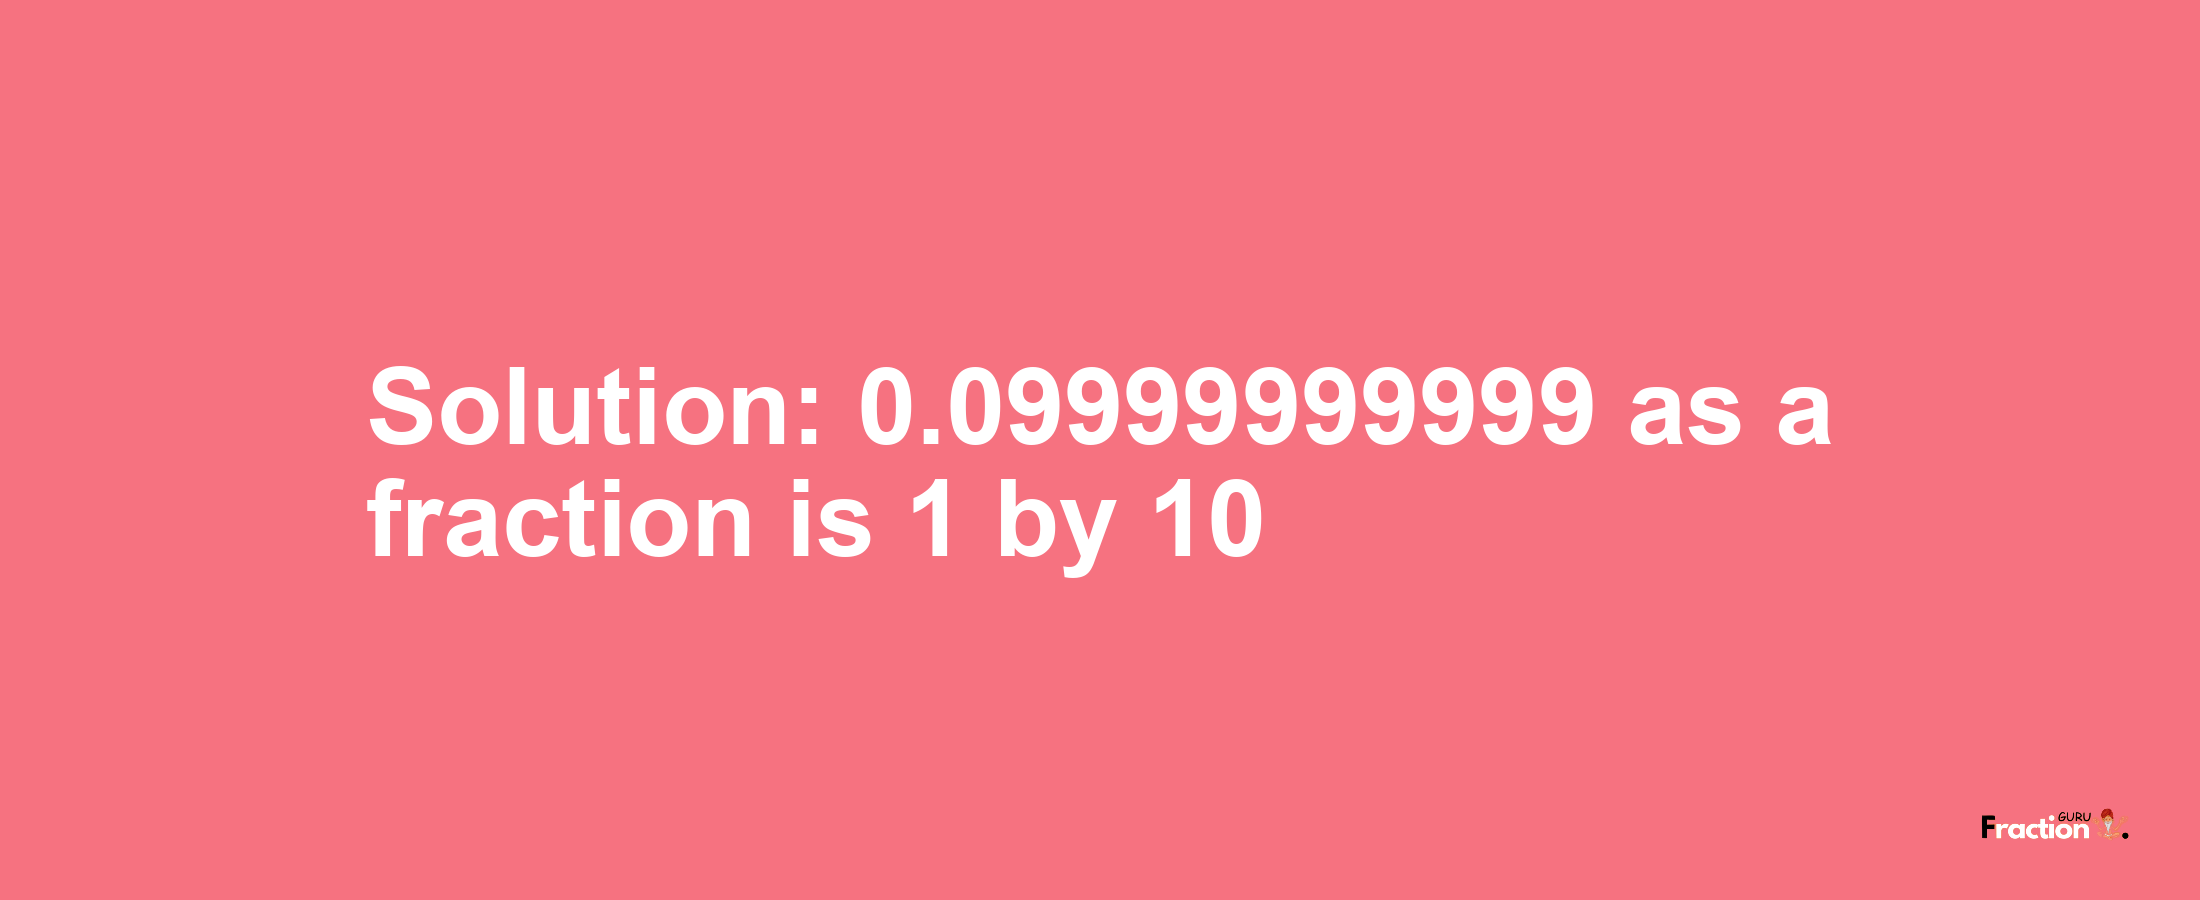 Solution:0.09999999999 as a fraction is 1/10